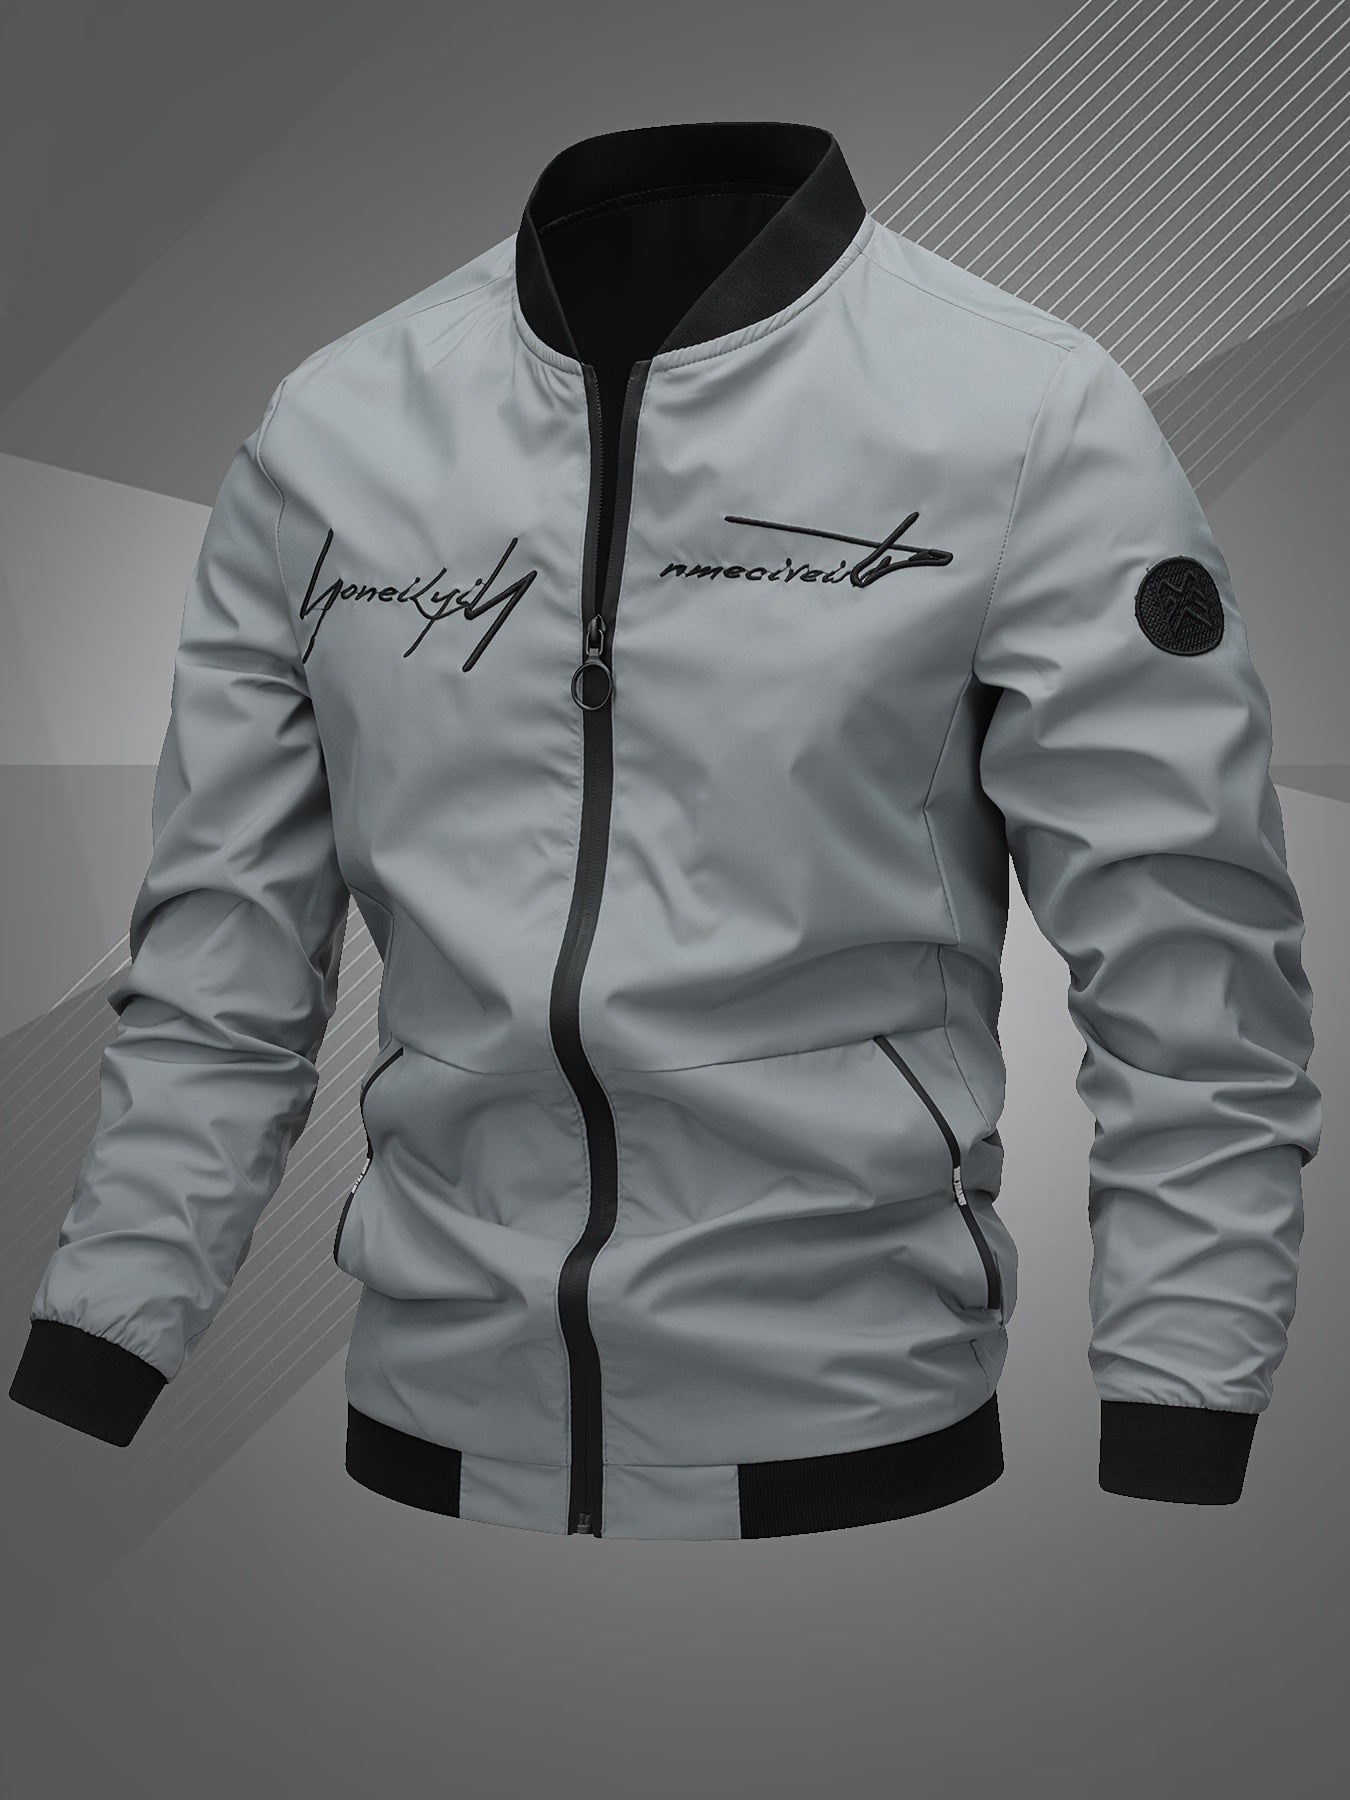 Men's Letter Embroidered Casual Bomber Jacket Gifts Best Sellers